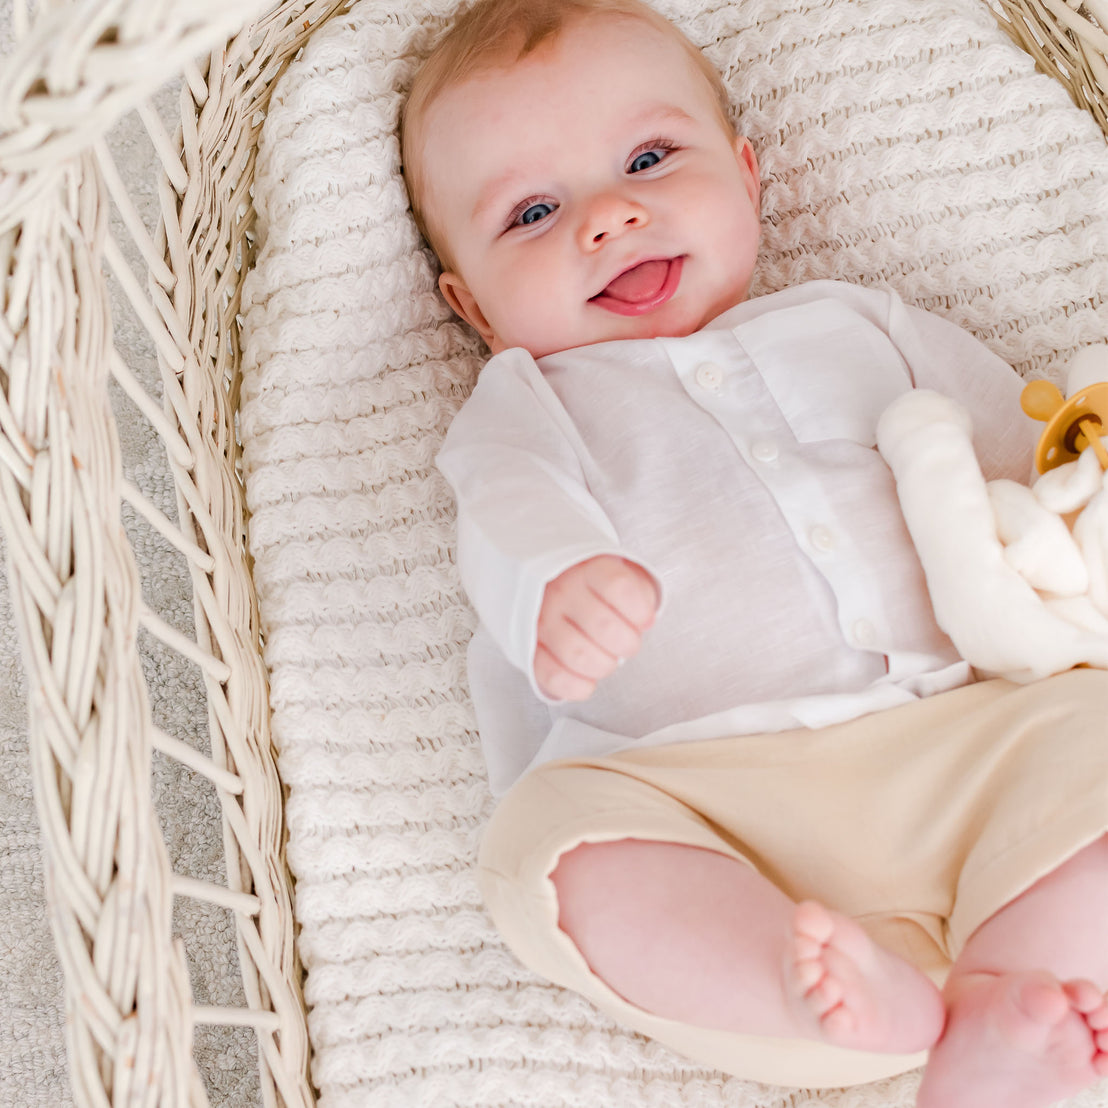 Smiling baby boy in a crib wearing the Silas White Linen Shirt